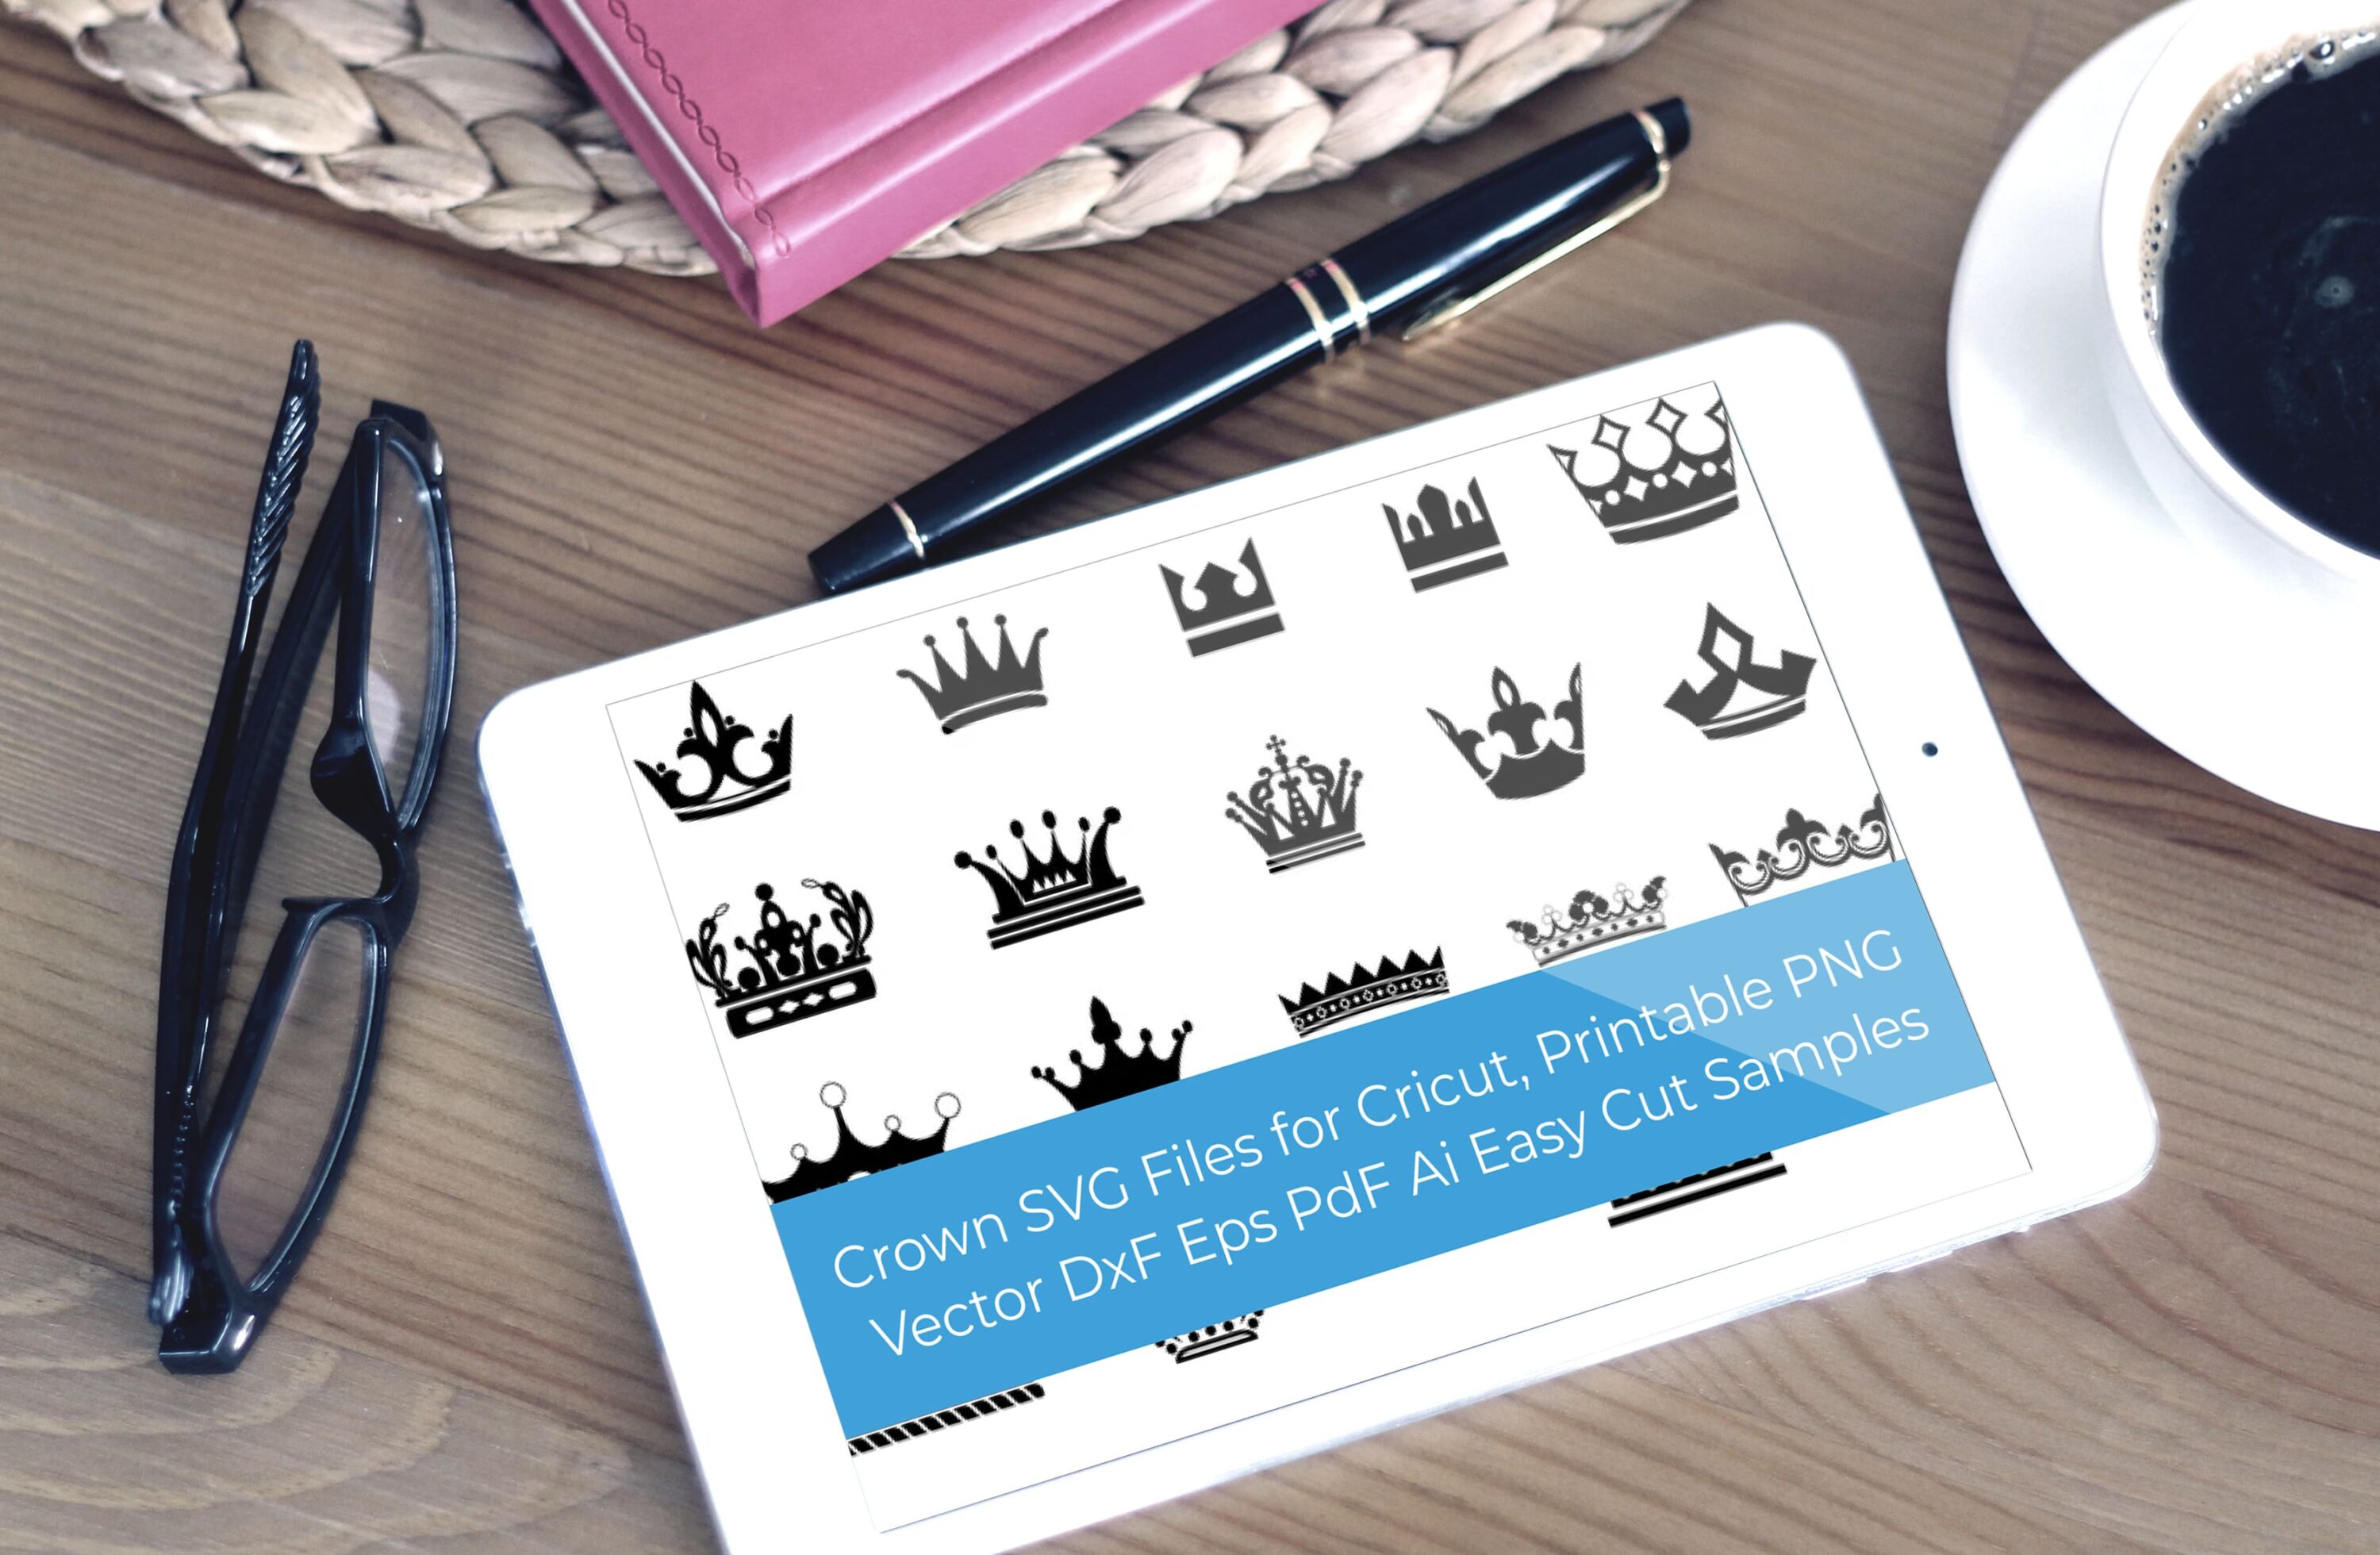 Tablet option of the Crown SVG Files For Cricut.